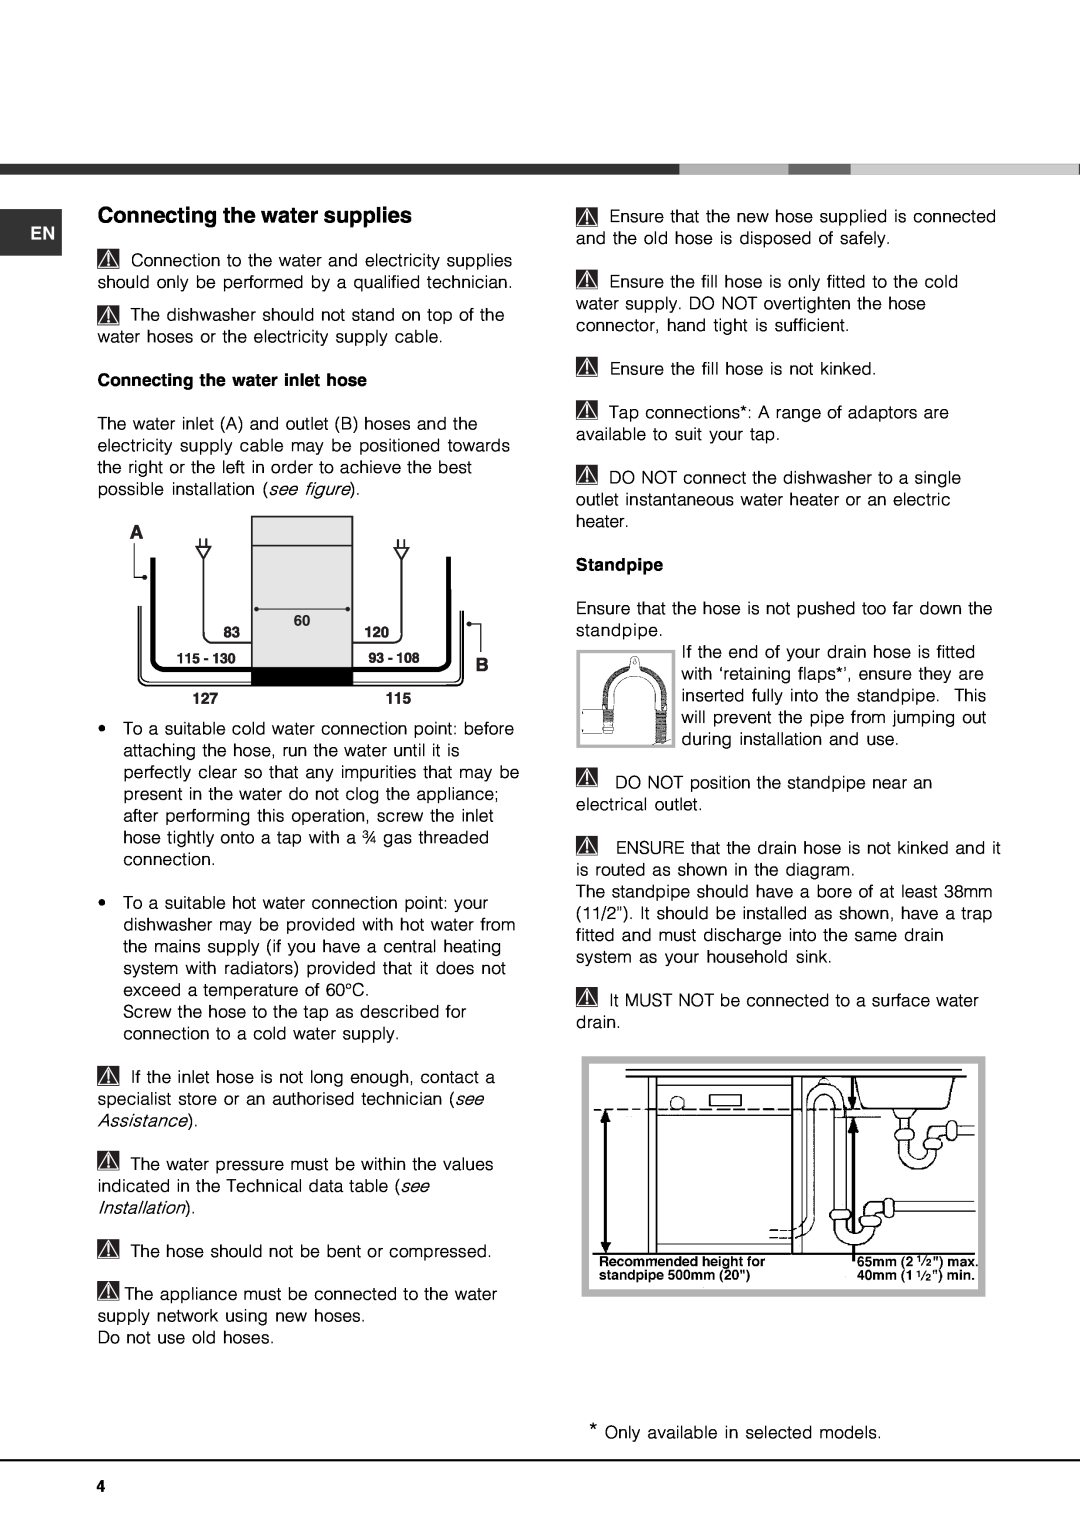 Hotpoint FDF-780 manual Connecting the water supplies 